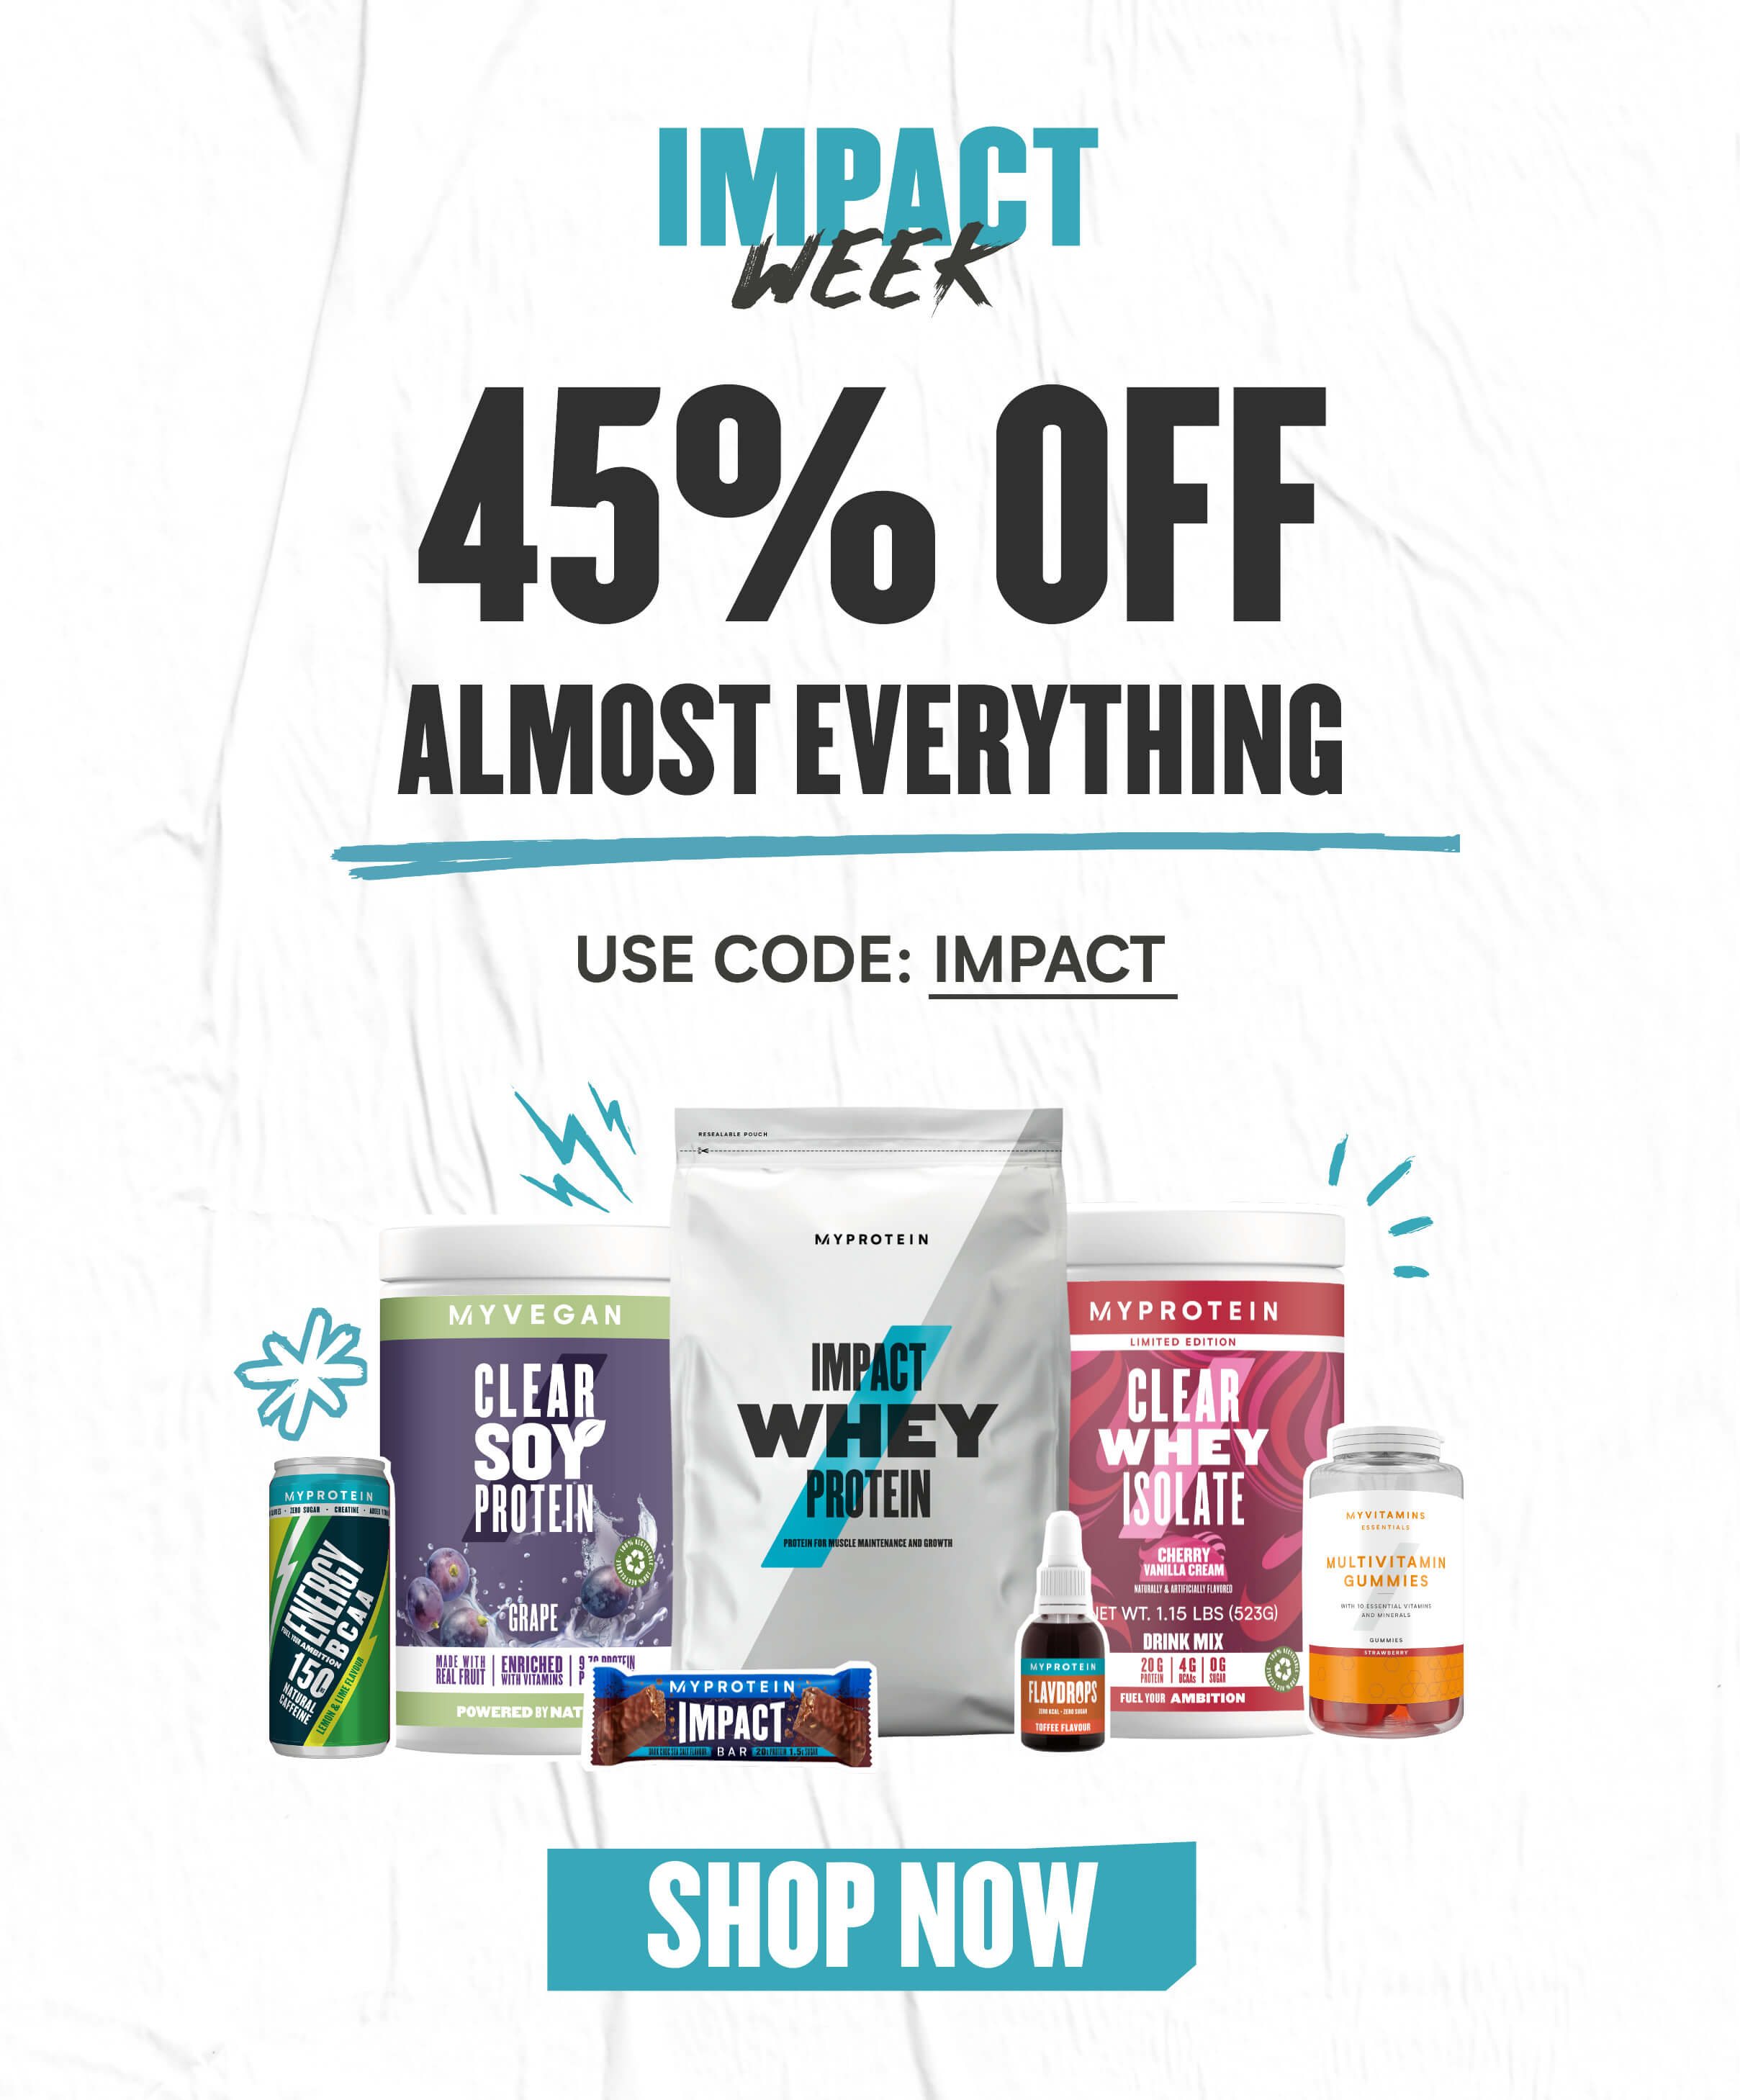 Impact week | 45% off almost EVERYTHING